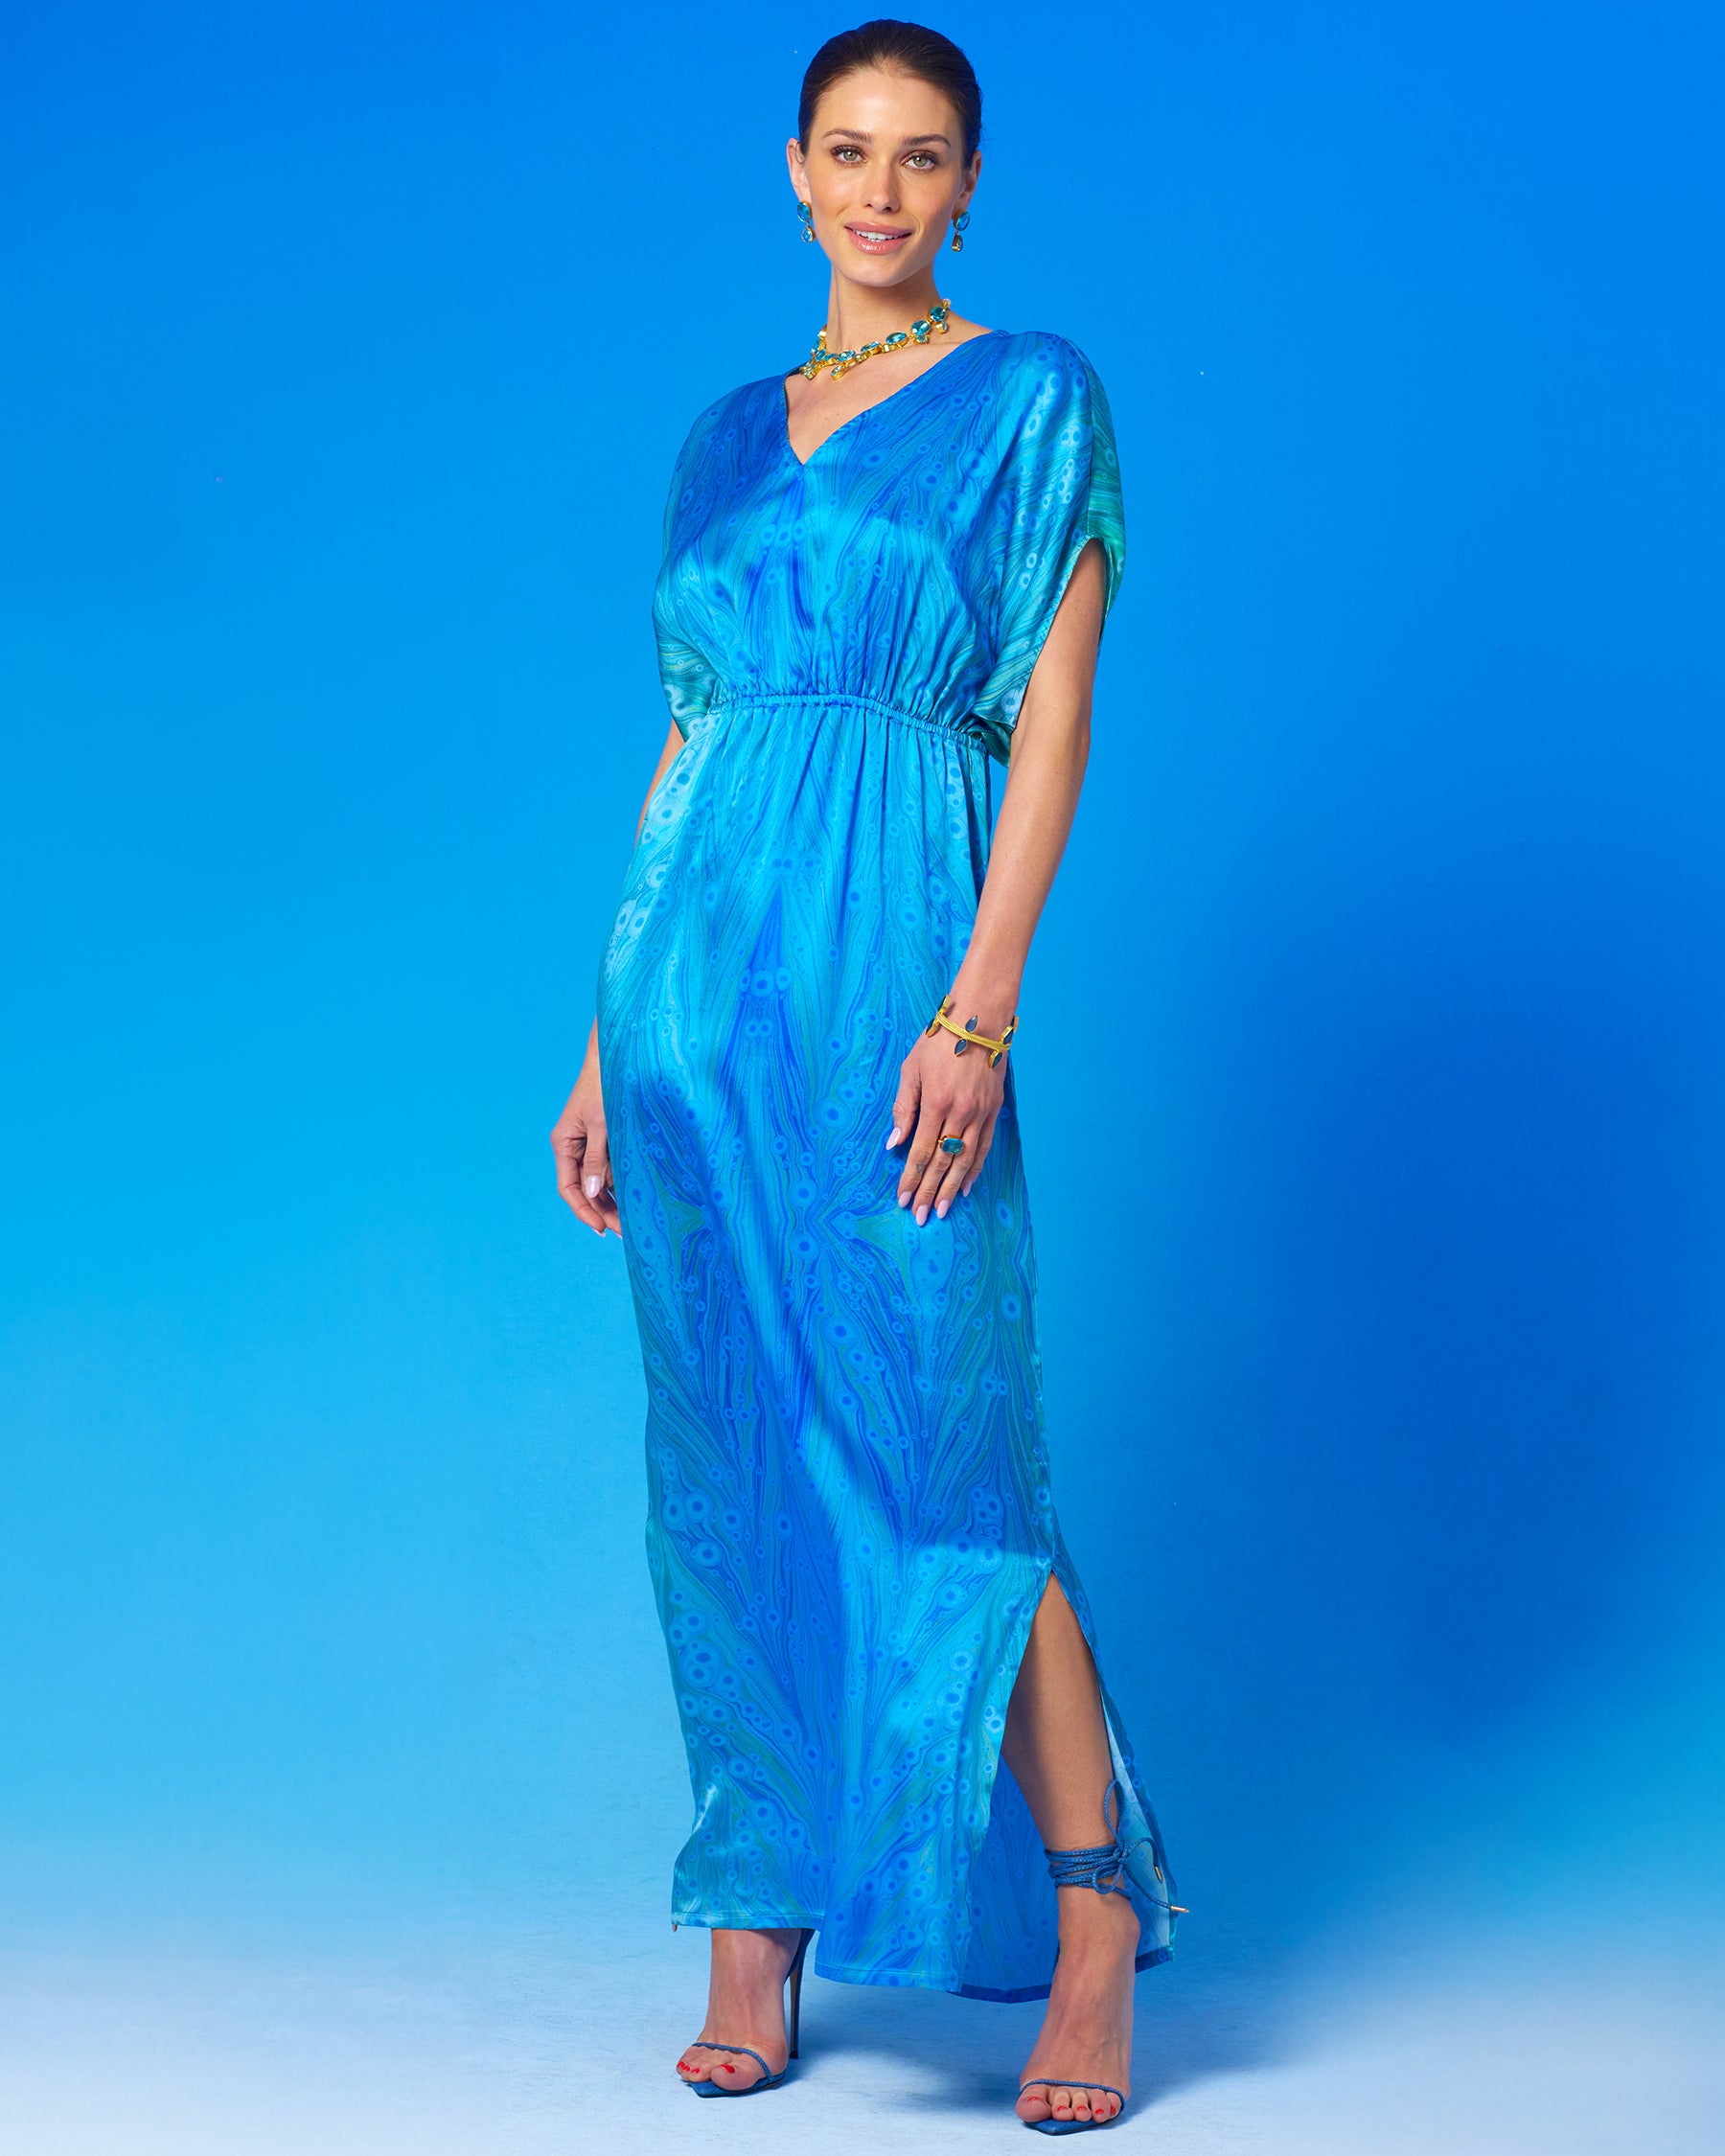 Calliope Long Silk Dress in Sea Nymph Blues front view